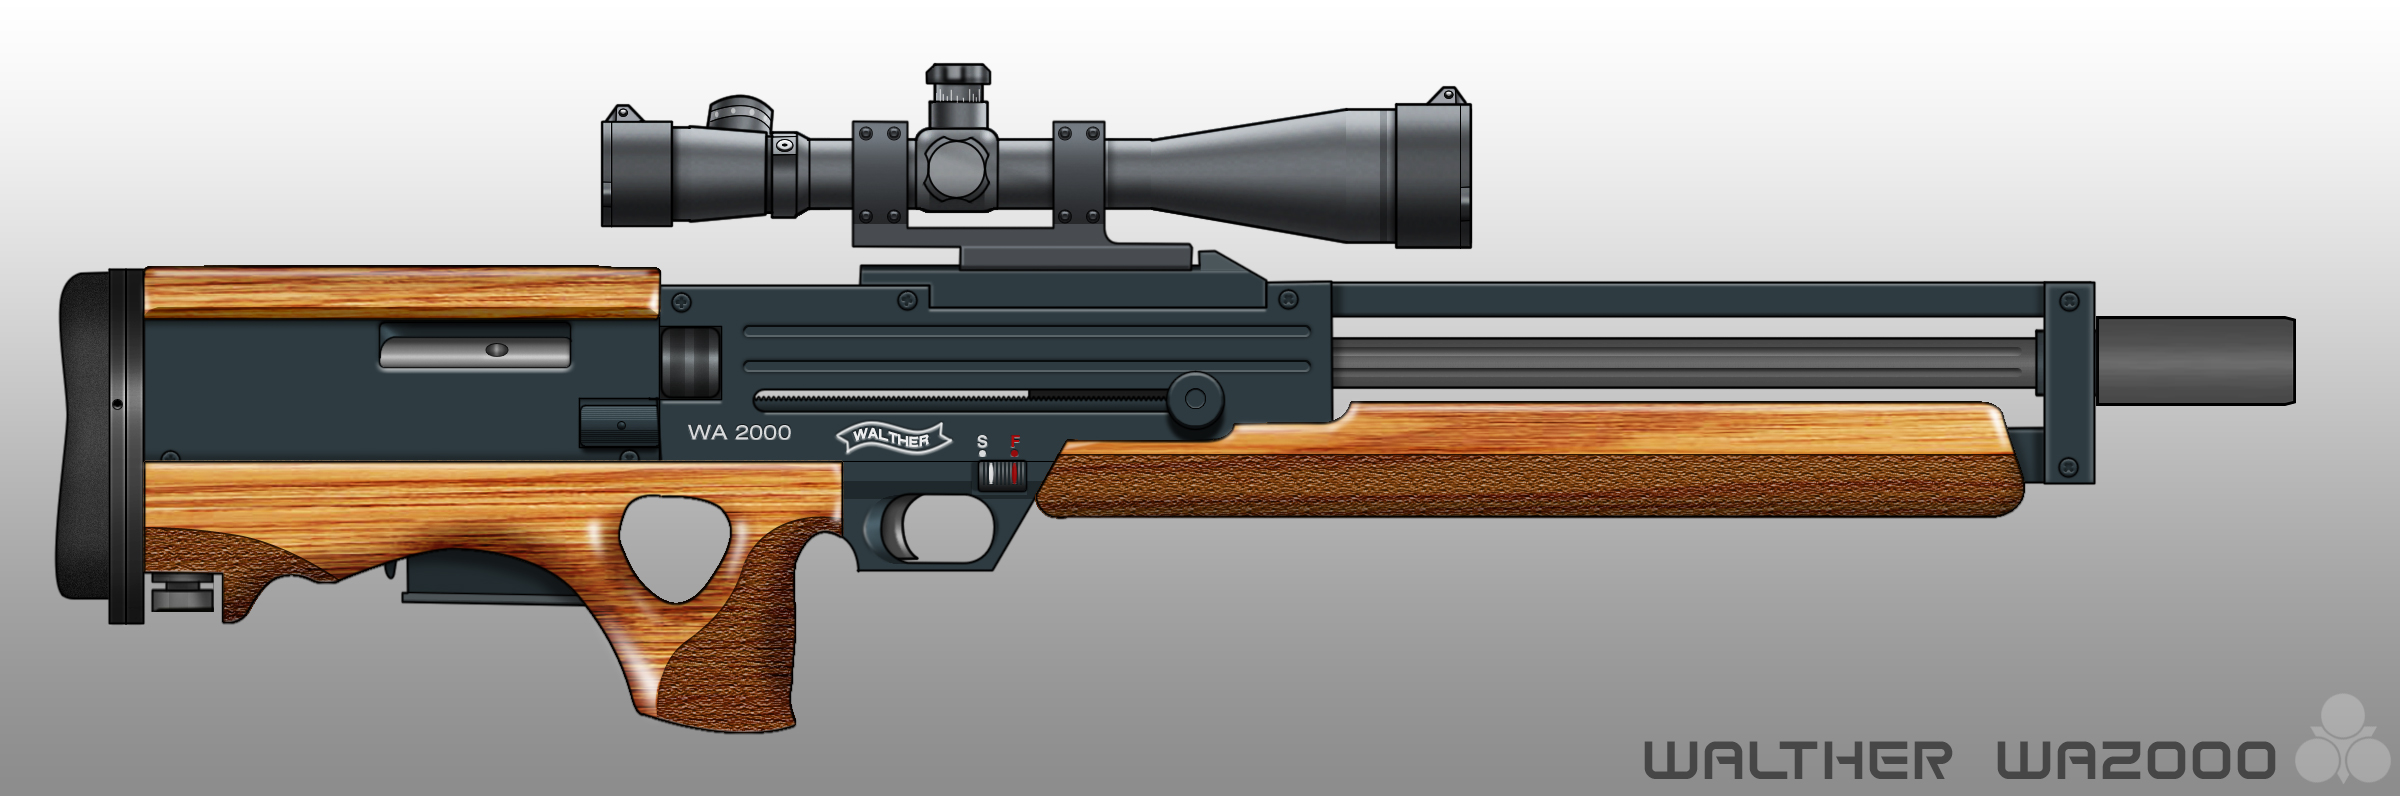 Walther Wa2000 Backgrounds, Compatible - PC, Mobile, Gadgets| 2400x796 px